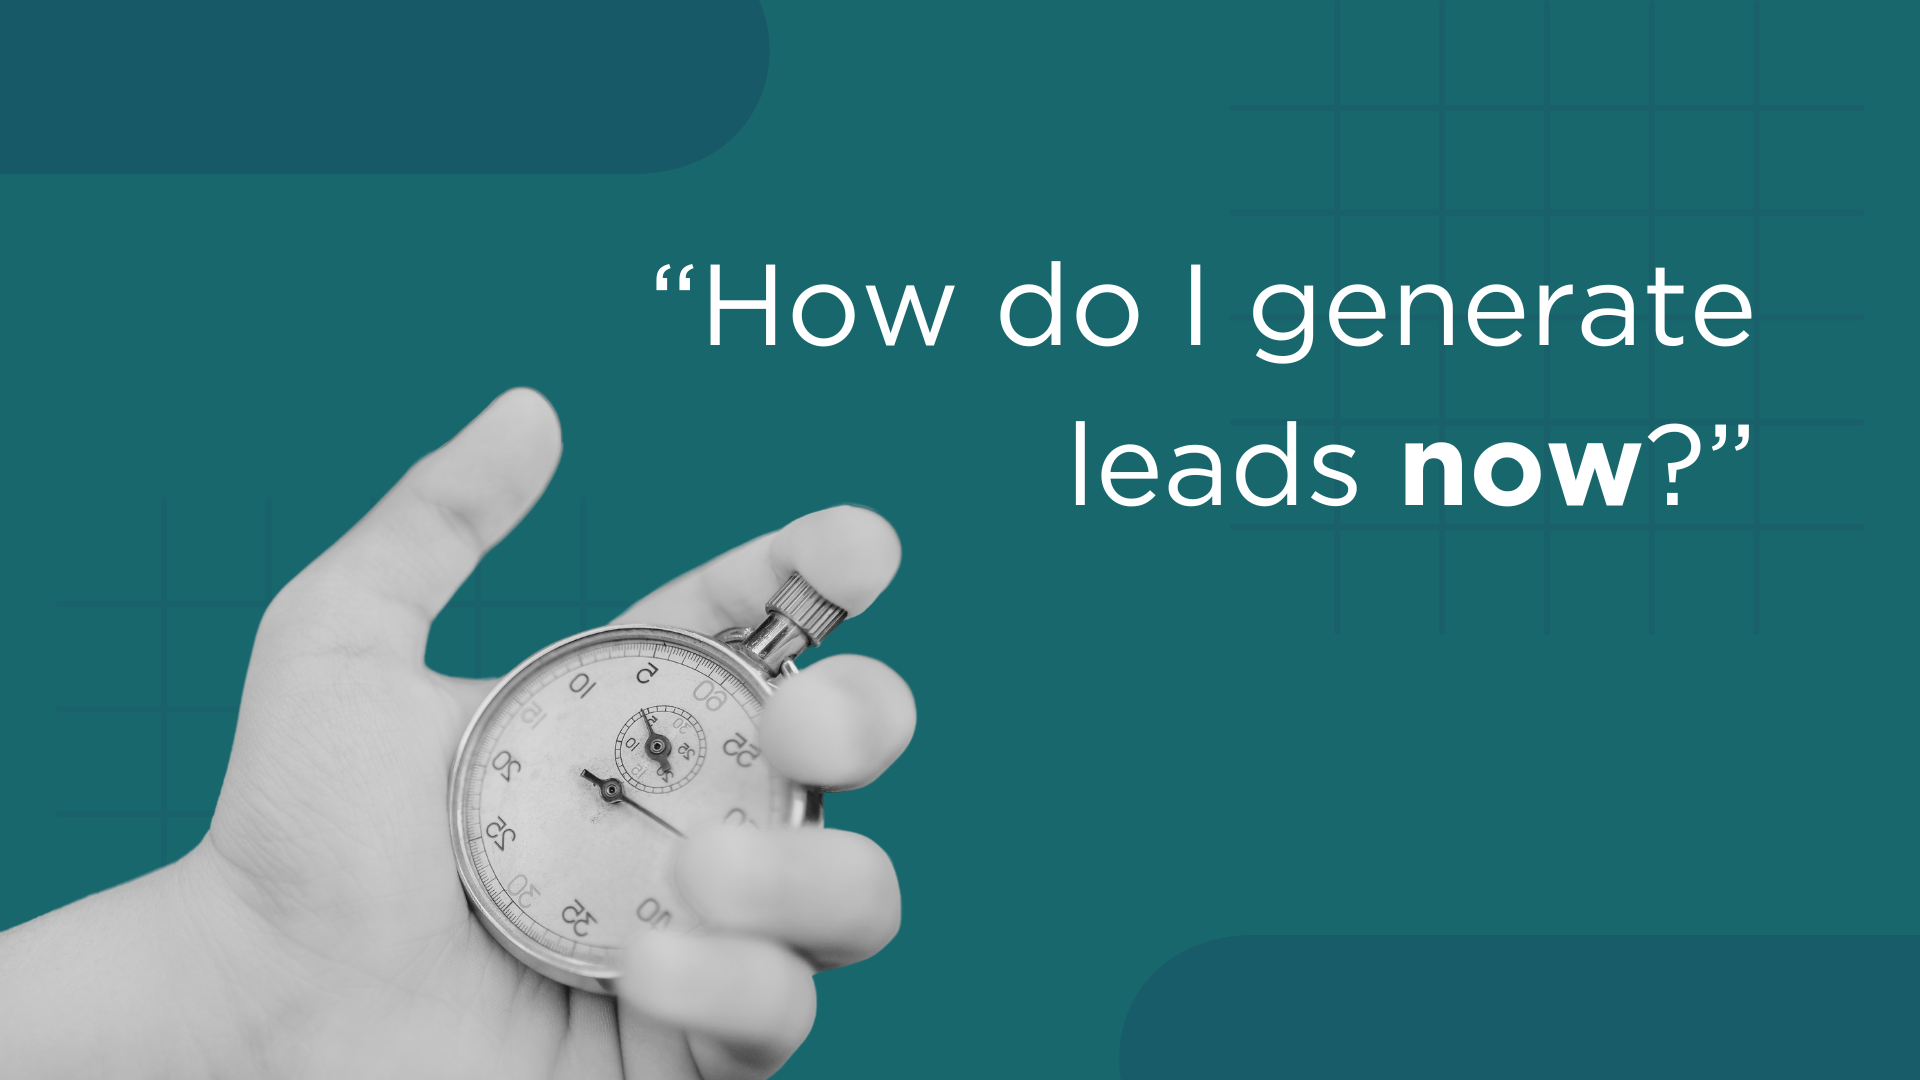 “How do I generate leads now?”